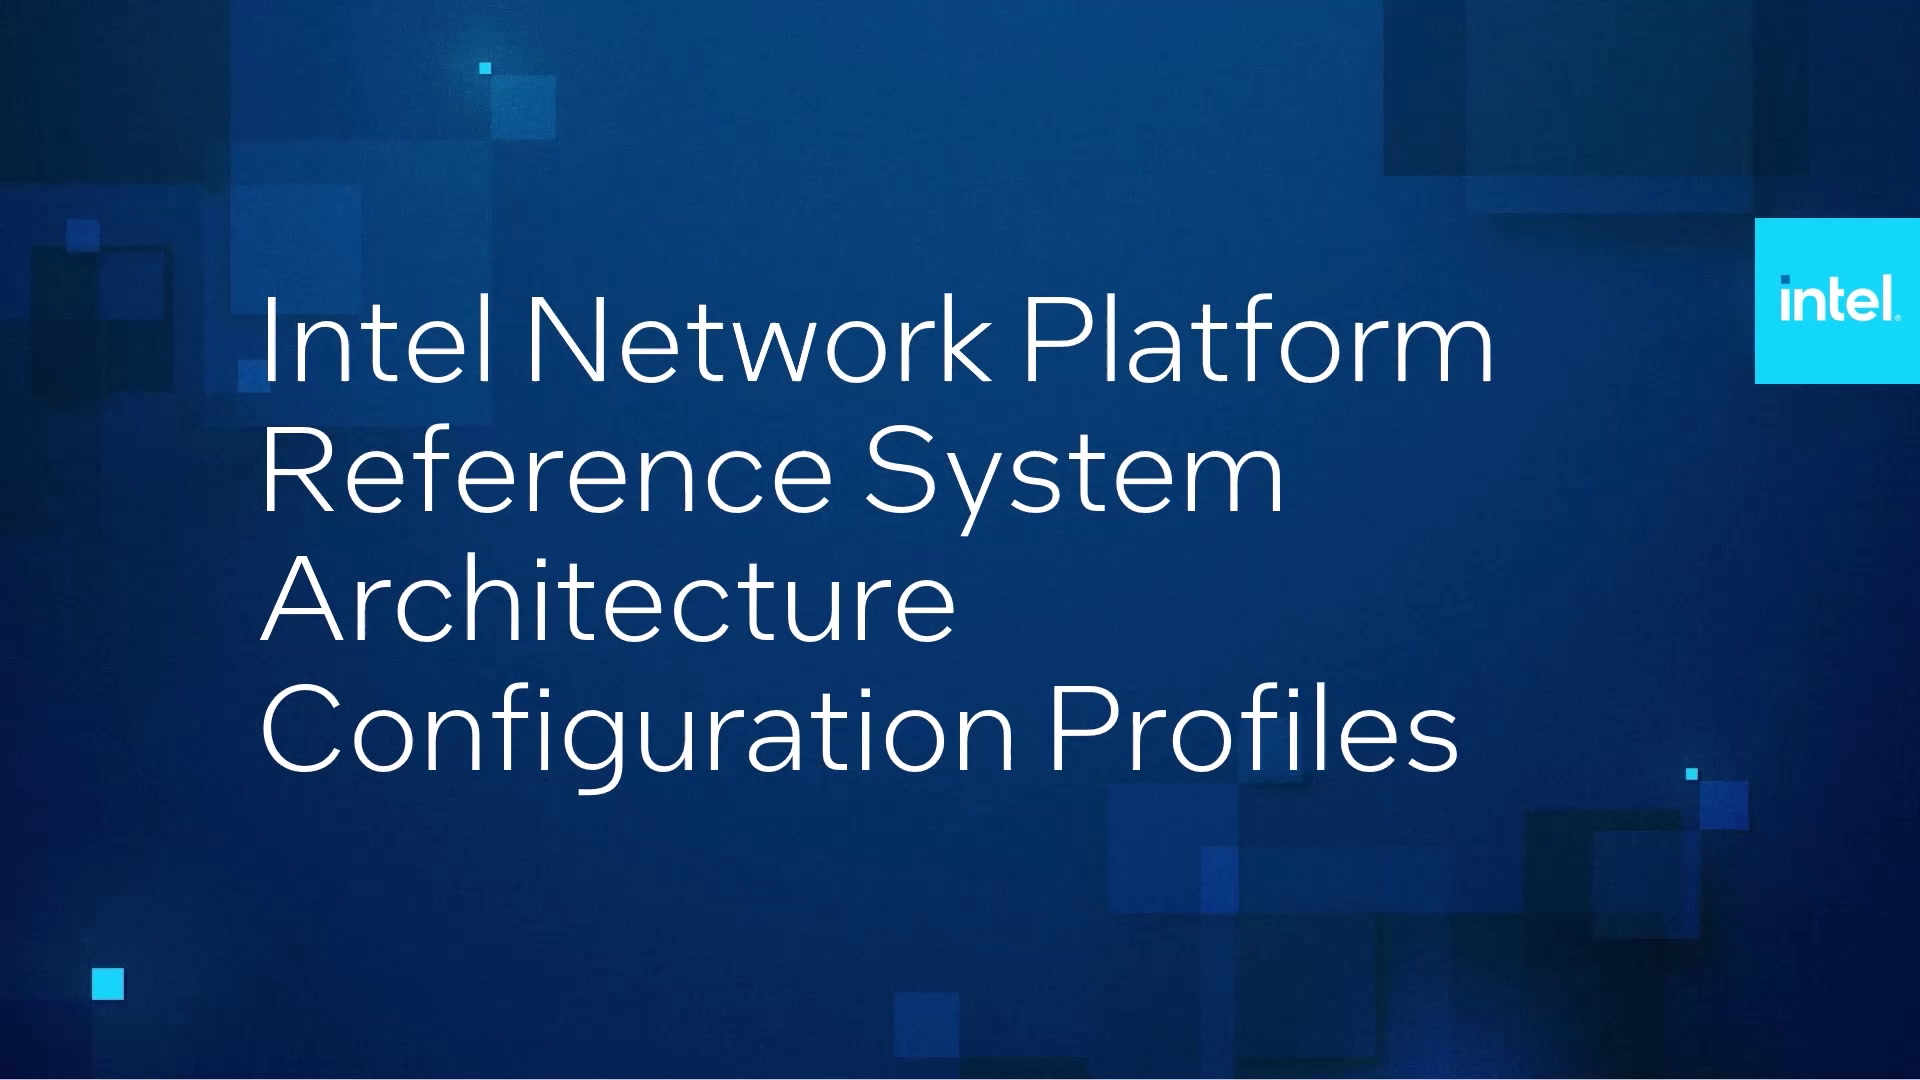 Intel Network Platform Reference System Architecture Configuration Profiles